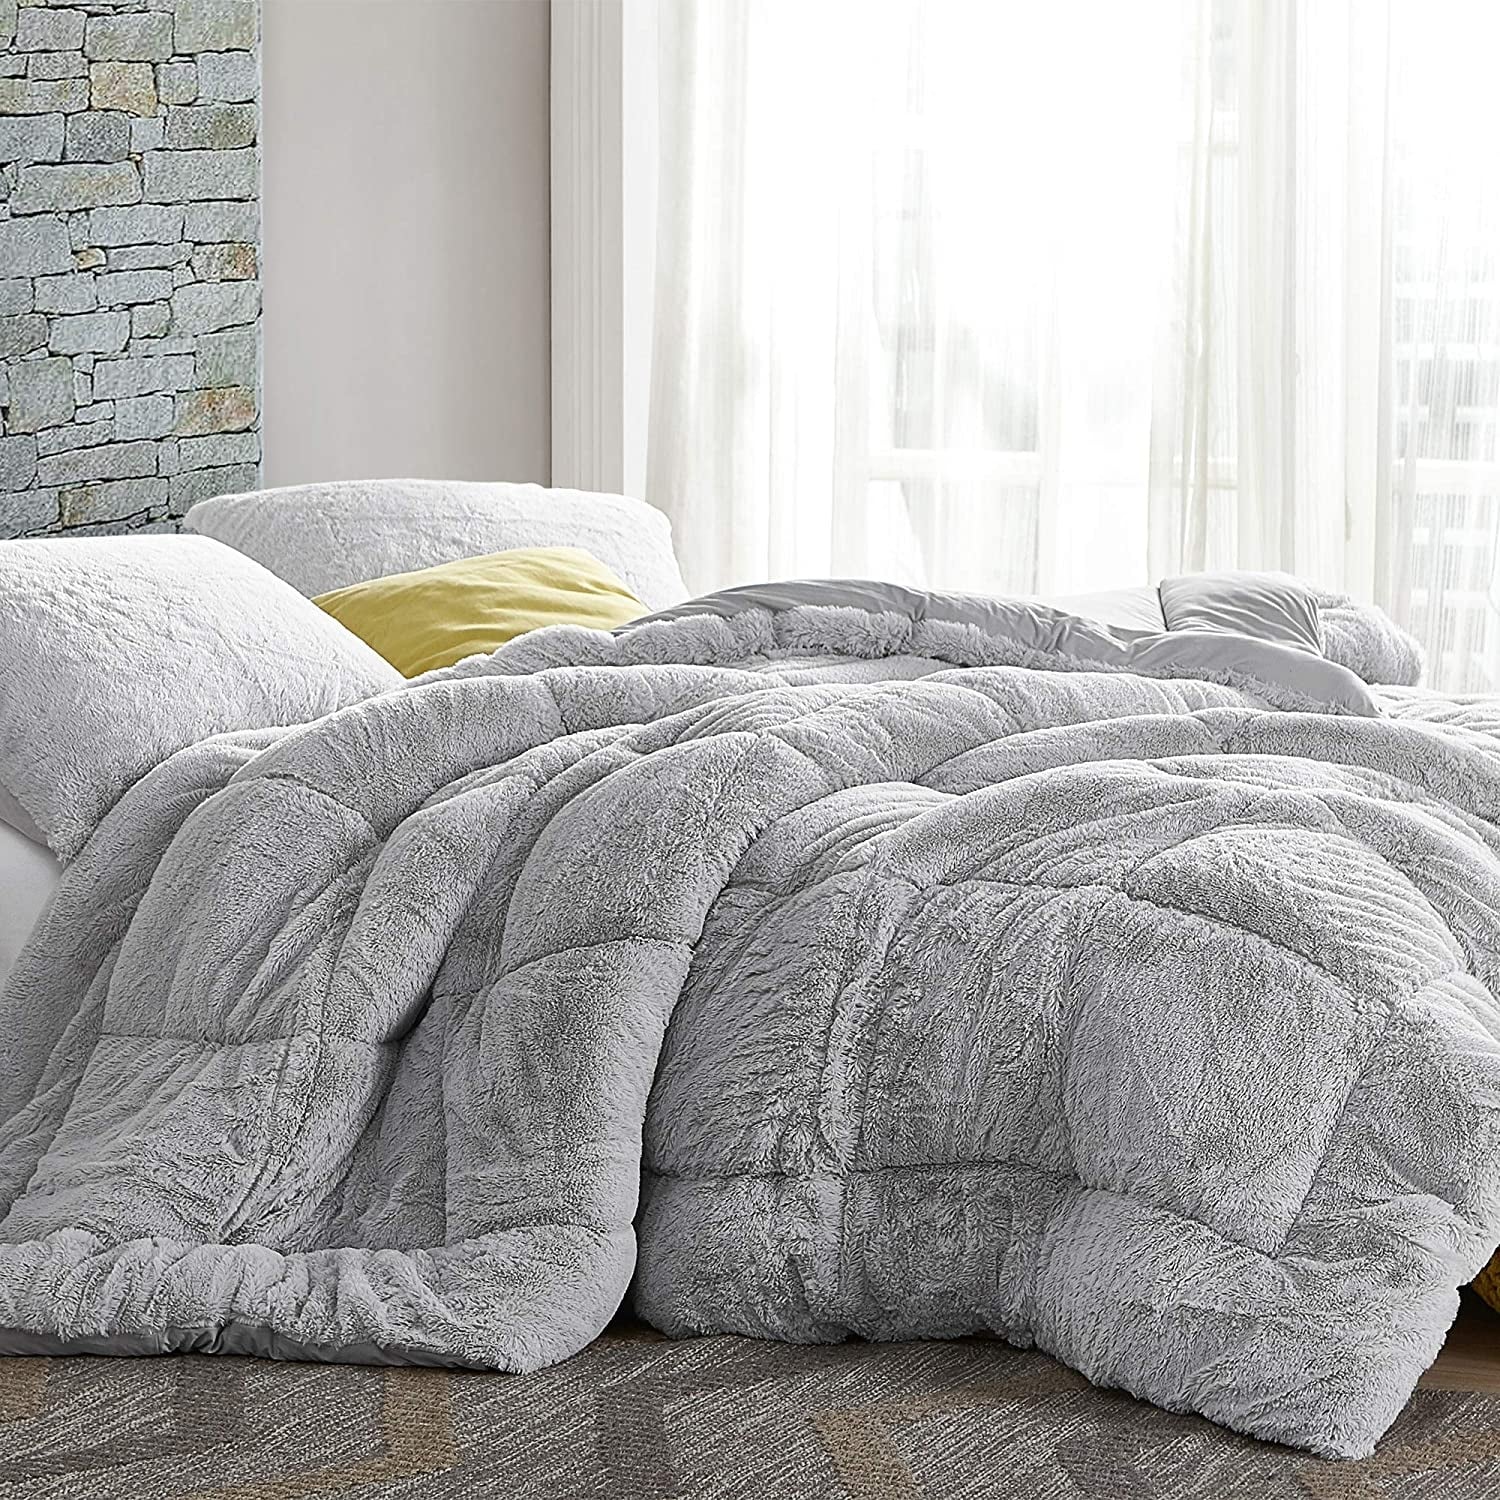 Oversized Comforters by Byourbed, where our Queen is a King Sized Comforter  and our King is an Oversized Comforter for your bedding comfort and decor.  From Comforters and Duvets to Sheet Sets